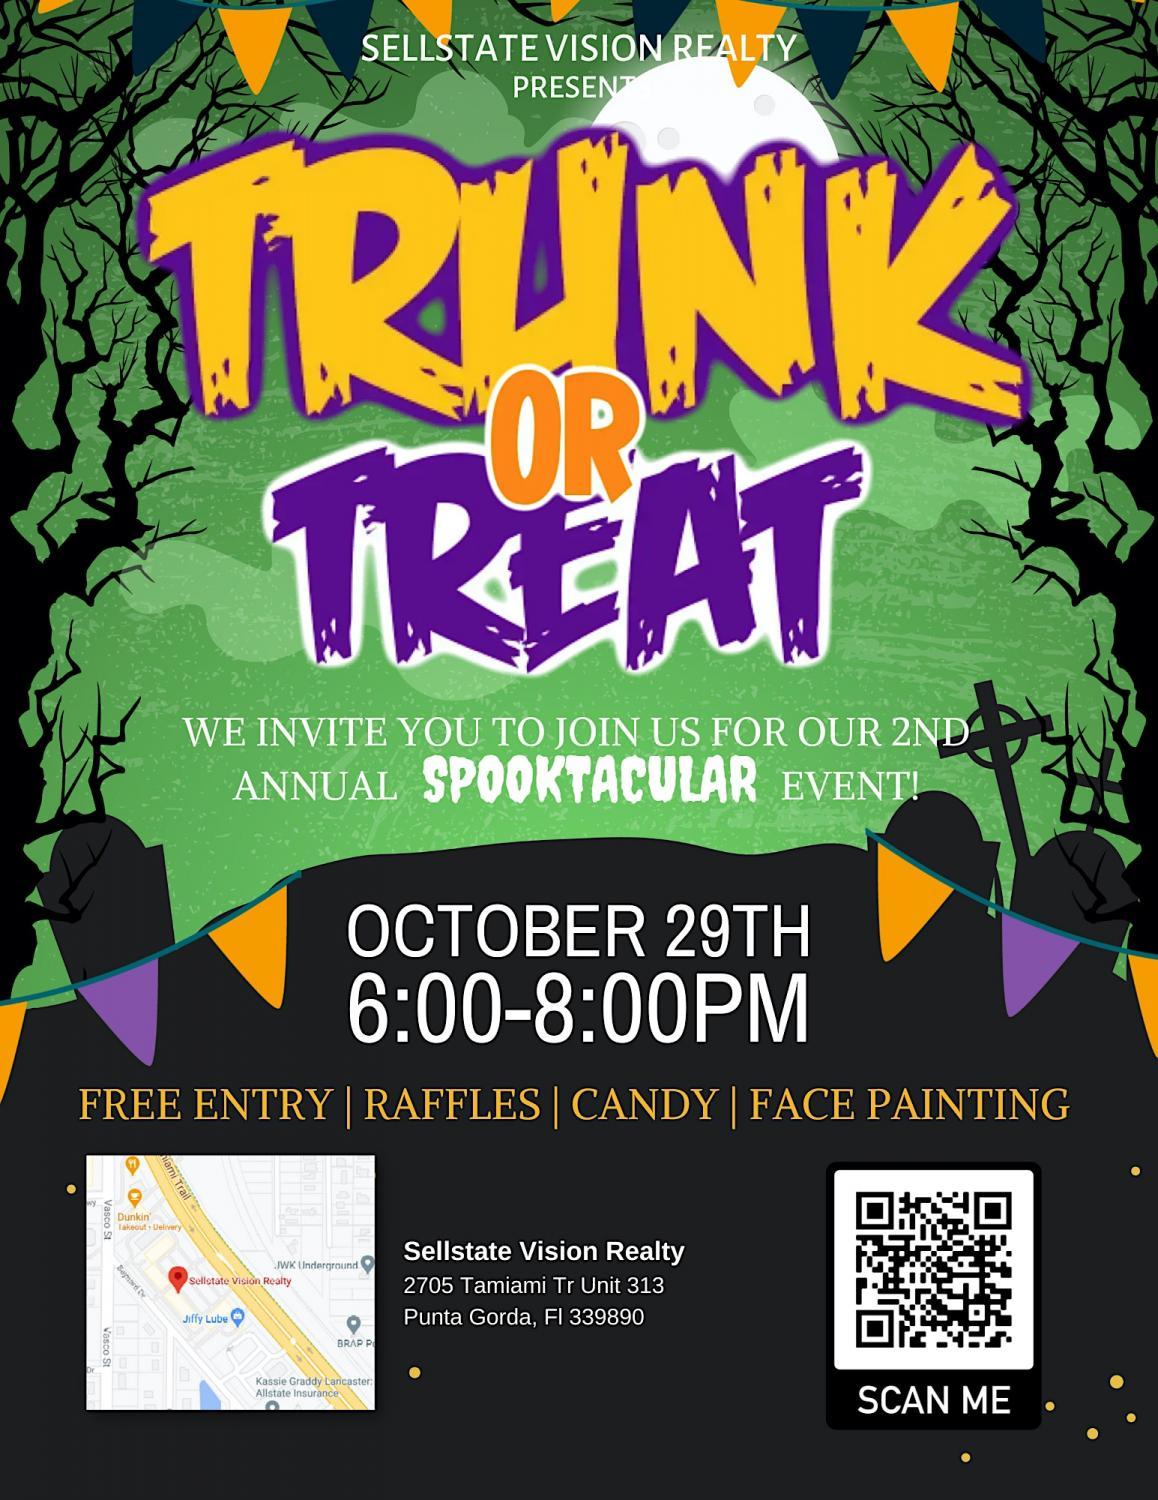 Second Annual Trunk Or Treat Spooktacular
Sat Oct 29, 7:00 PM - Sat Oct 29, 7:00 PM
in 9 days